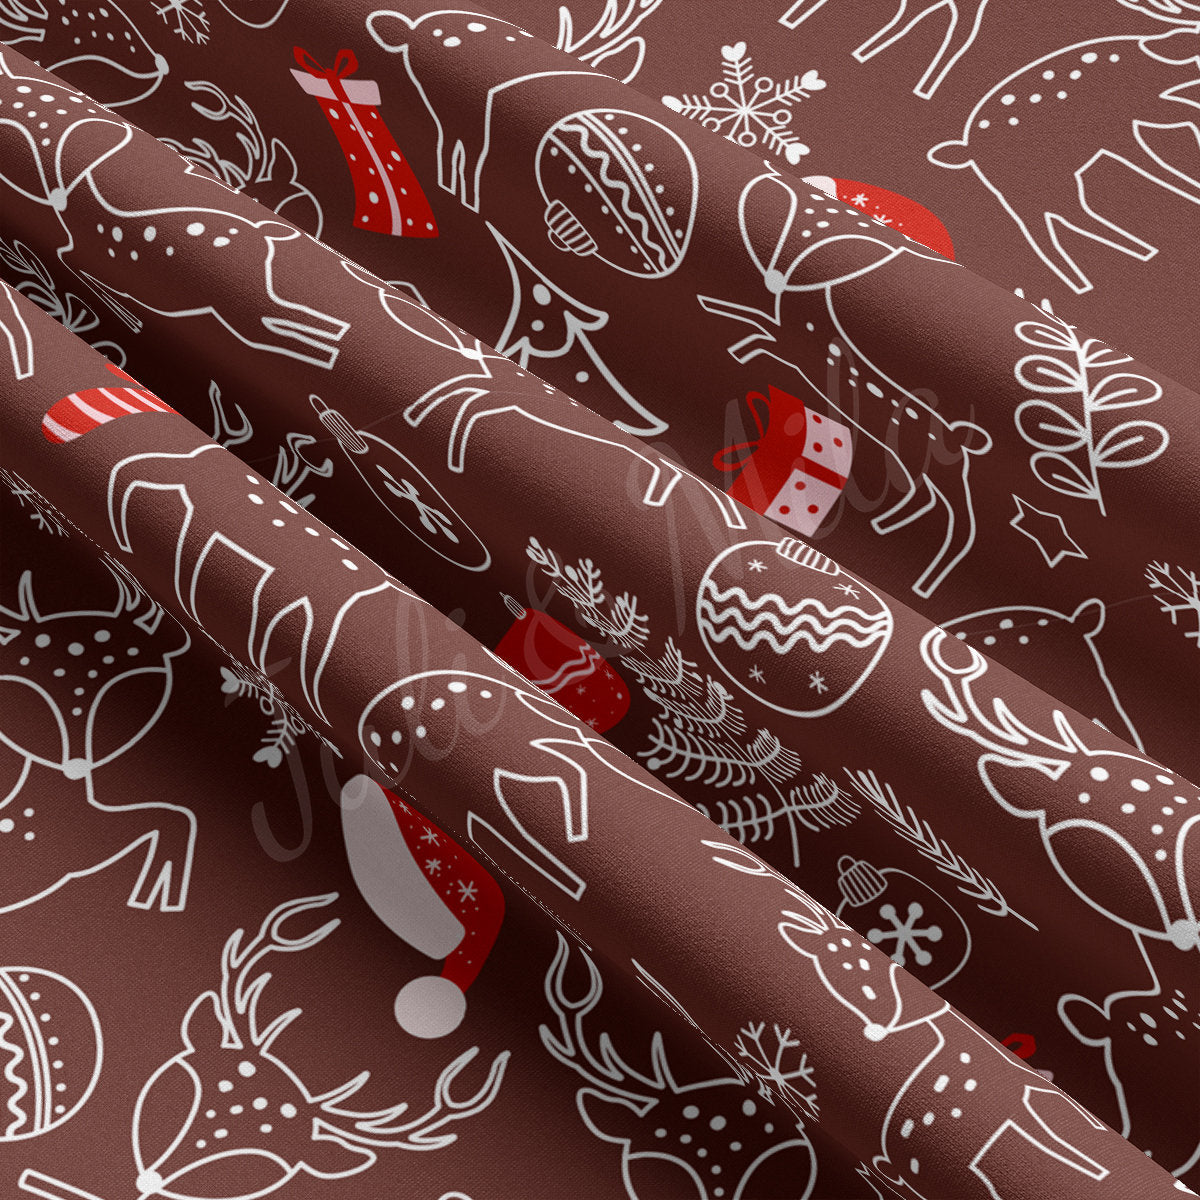 Christmas DBP Fabric Double Brushed Polyester Fabric by the Yard DBP Jersey Stretchy Soft Polyester Stretch Fabric DBP2164